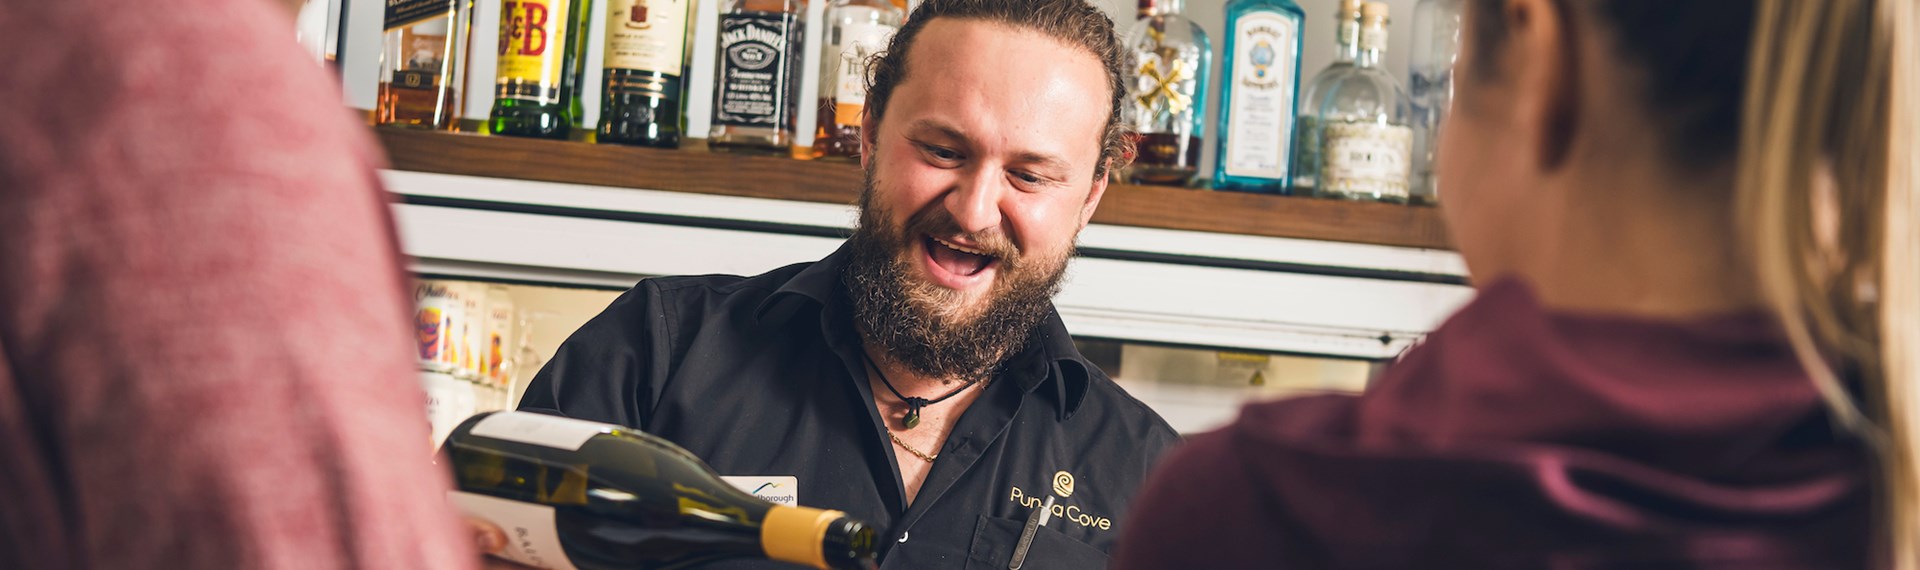 A friendly bartender pours Pinot Noir into glasses for customers at the Boatshed Cafe and Bar at Punga Cove - choose from a great range of local craft beer, wine , cocktails, soft drinks and expresso coffee.